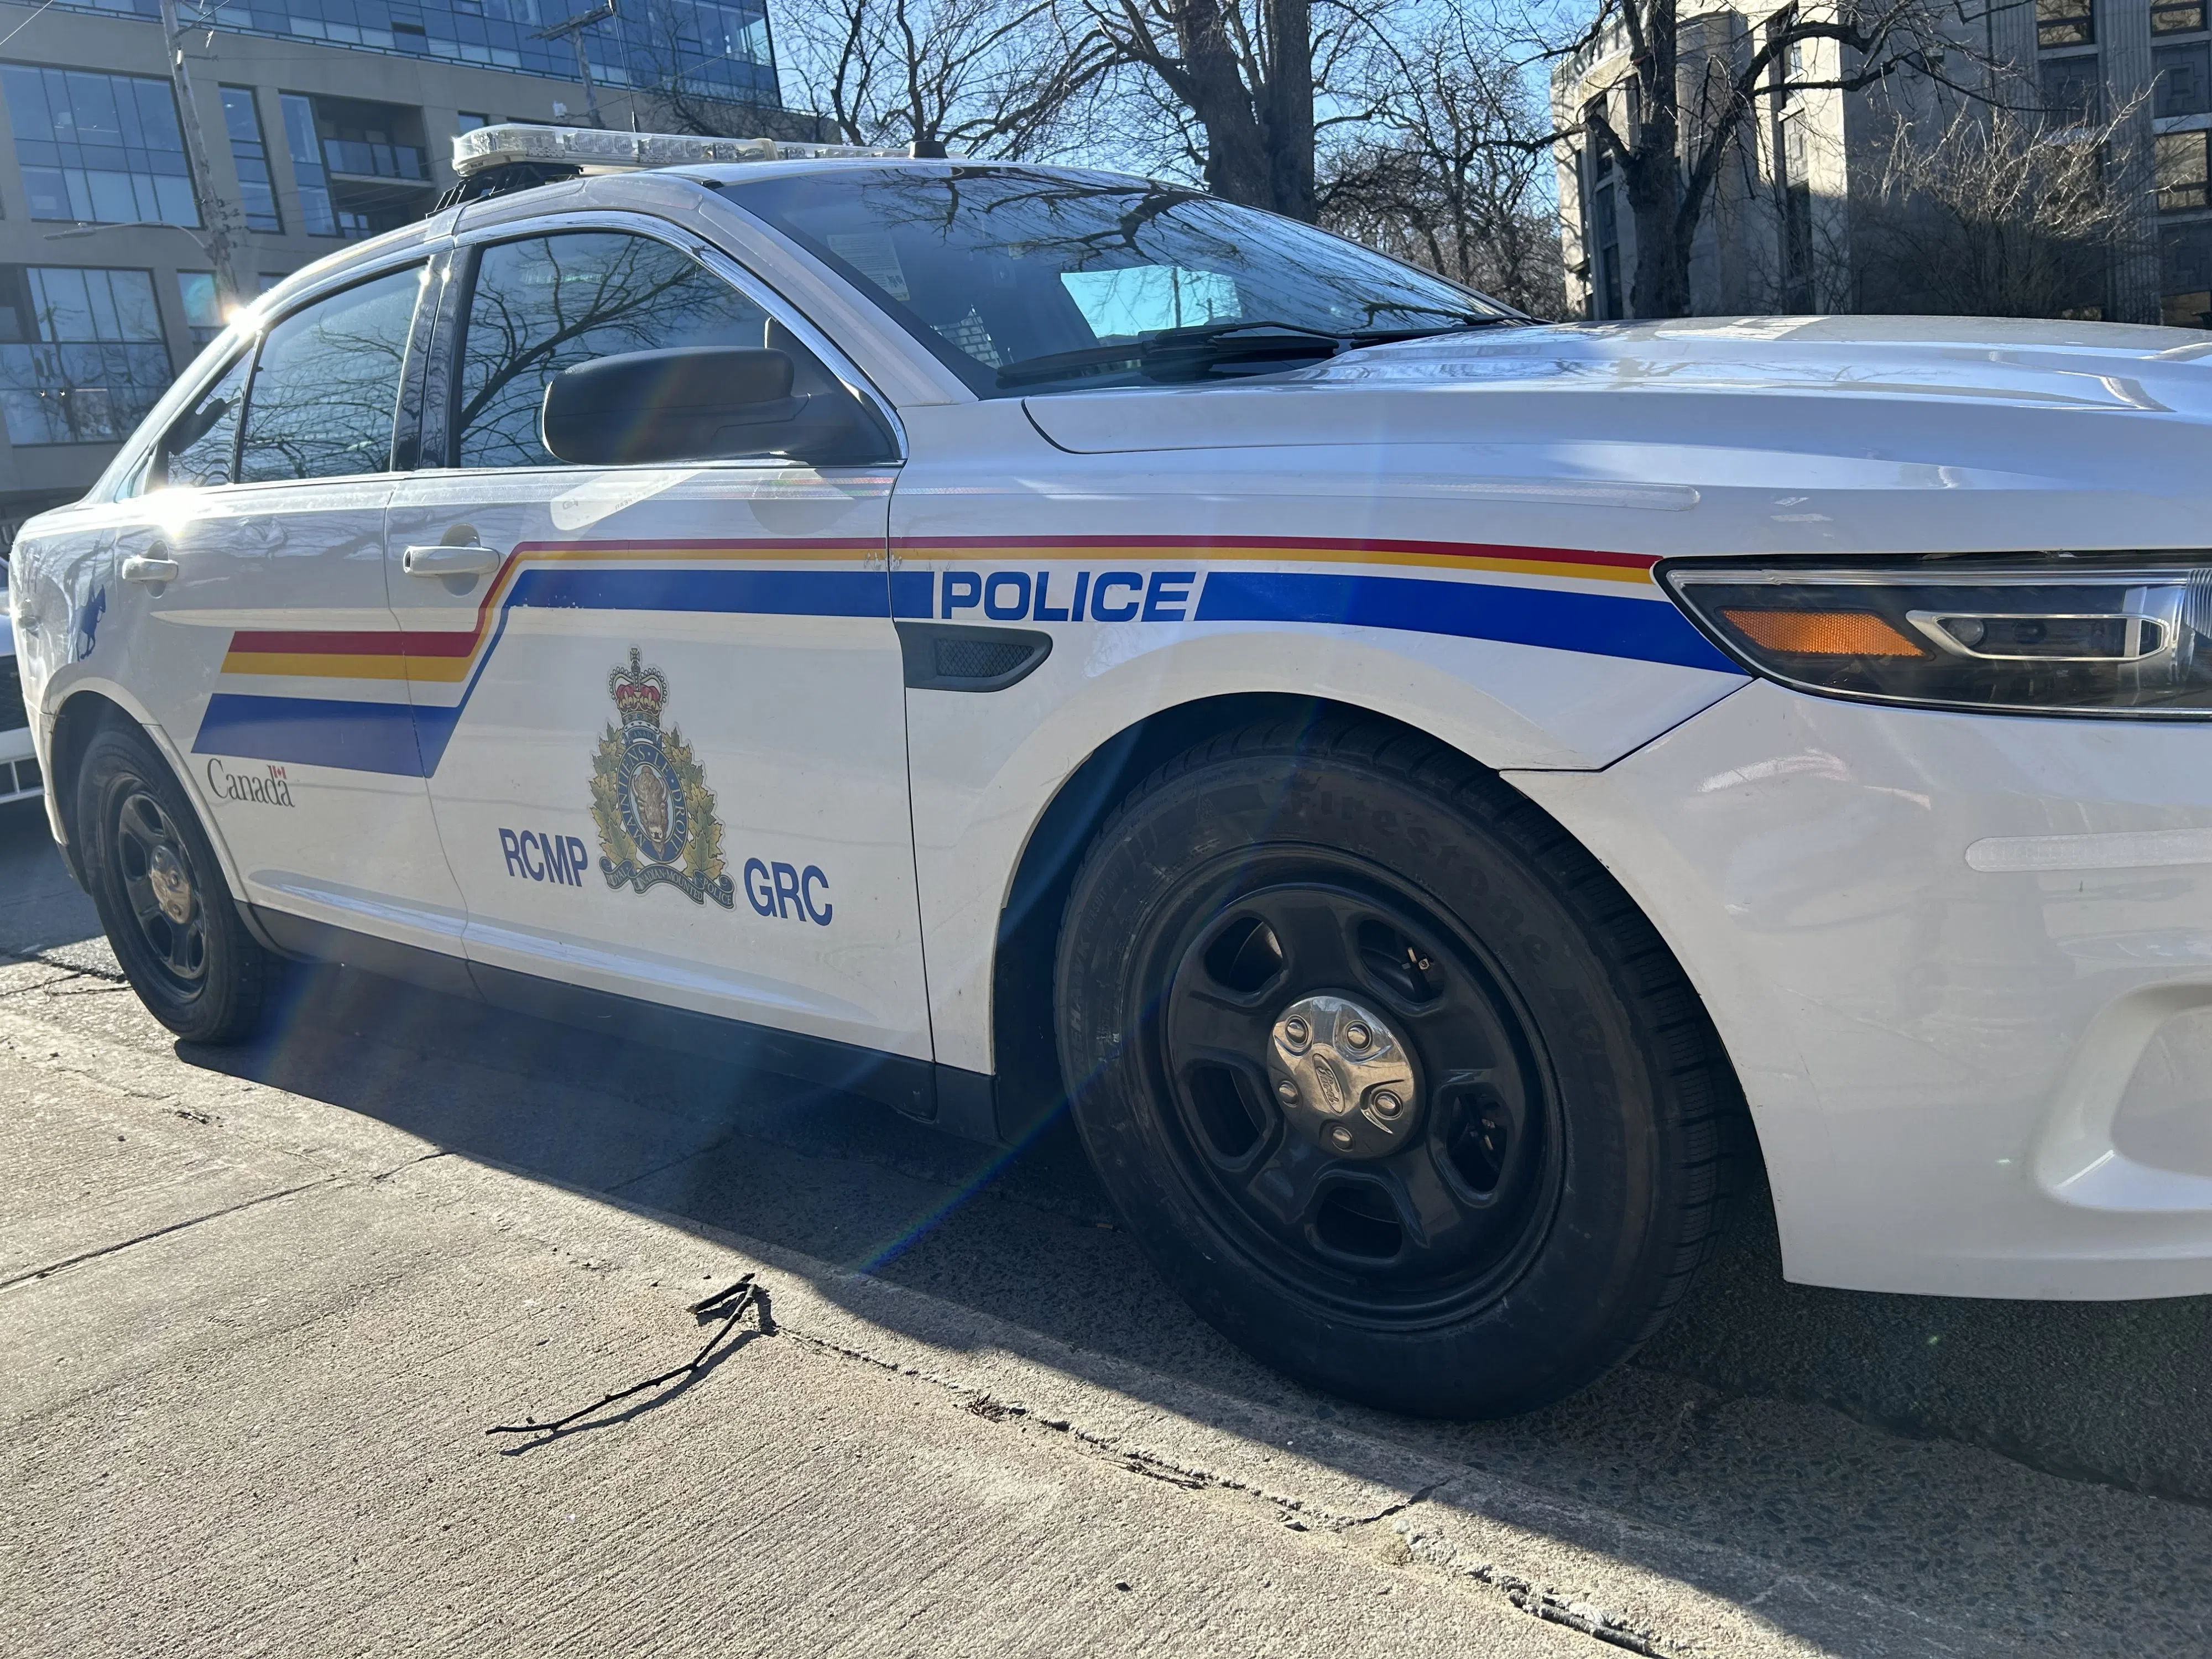 42-year-old man stabbed by youth: RCMP